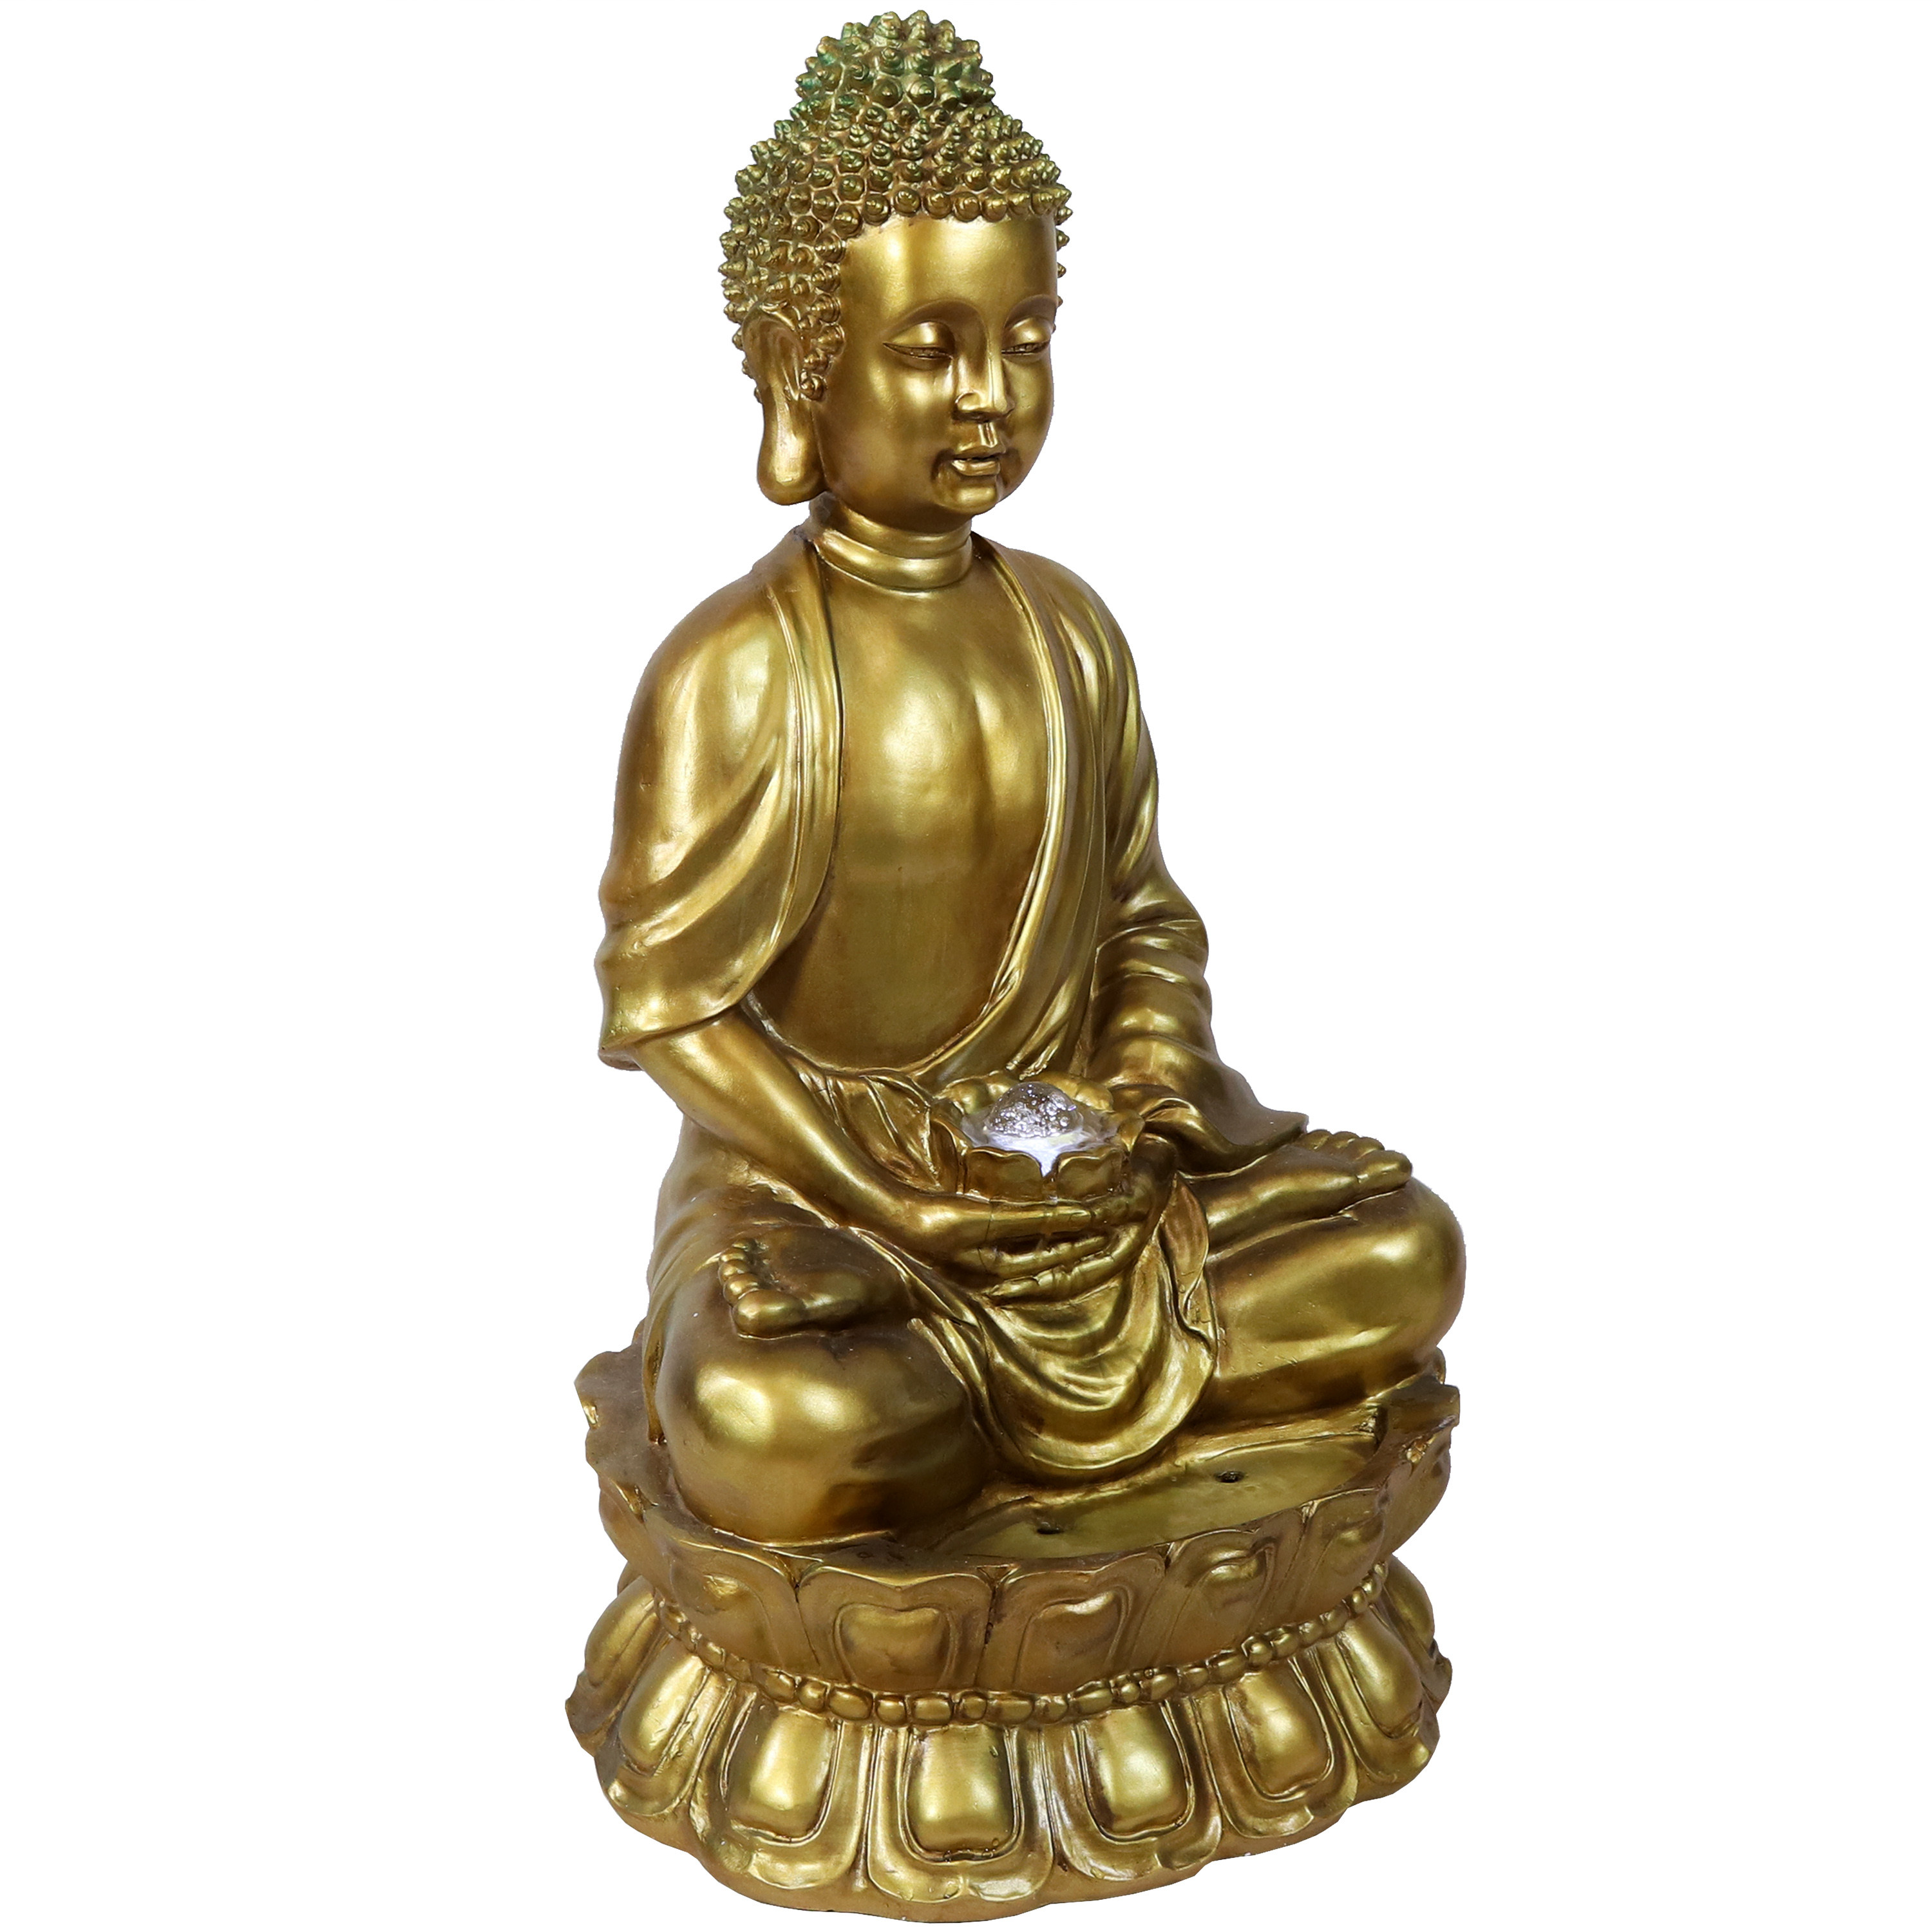 Sunnydaze Relaxed Buddha Outdoor Water Fountain with Light - 36 Inch